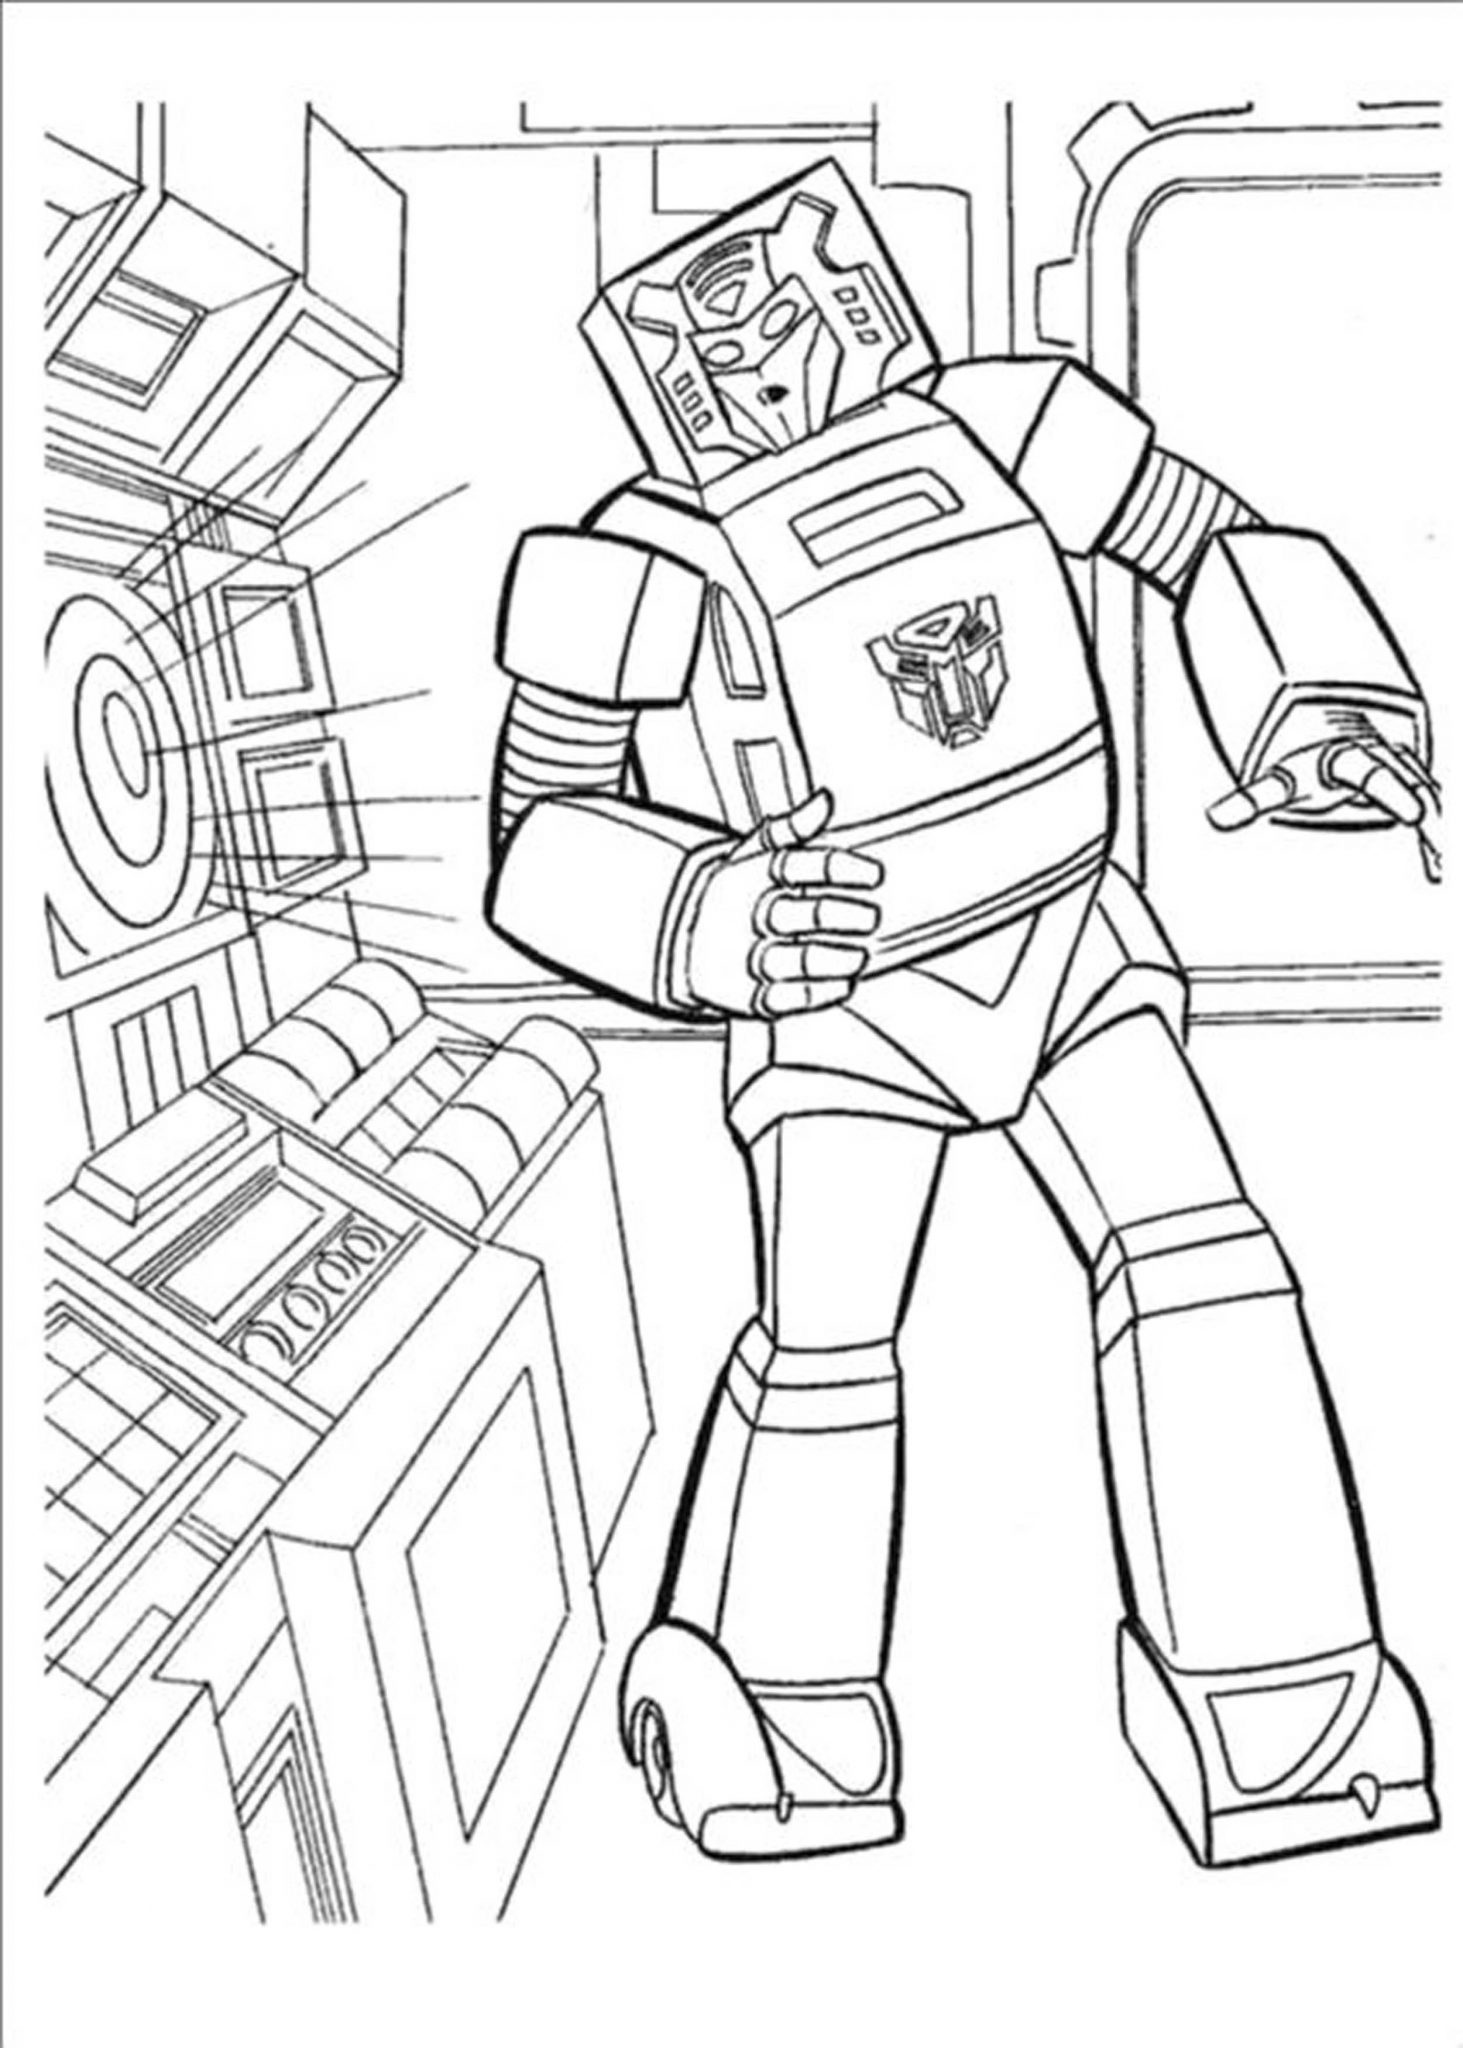 Print &Amp; Download - Inviting Kids To Do The Transformers Coloring Pages